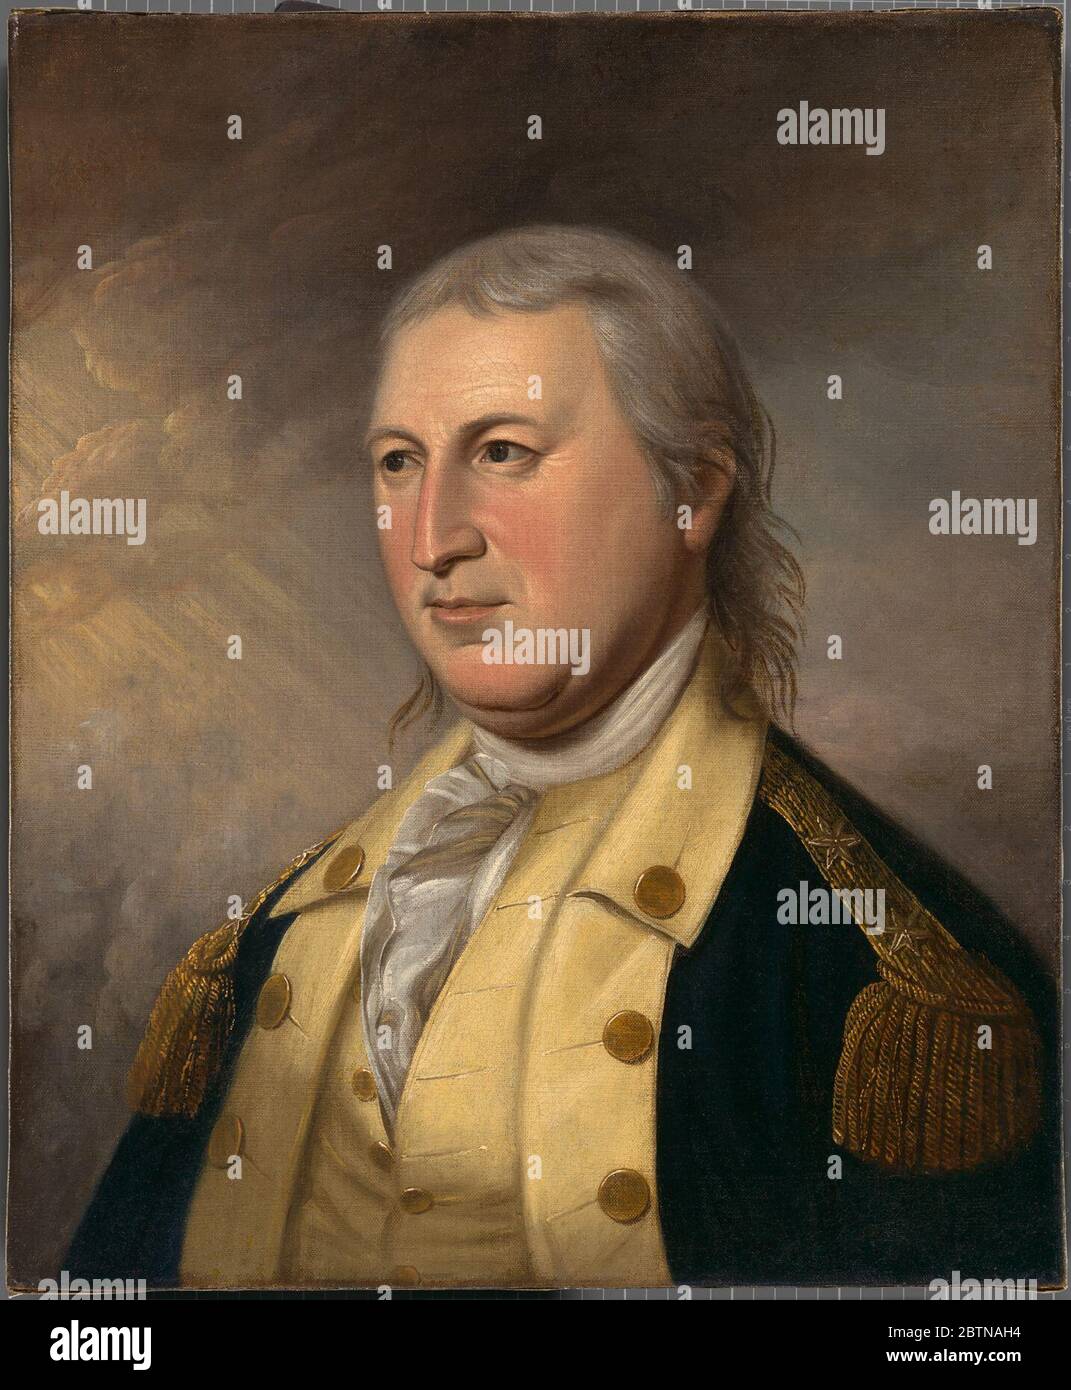 Horatio Gates. Horatio Gates, a professional soldier in the British army, fought in the French and Indian War and rose to the rank of major before peace put an end to his advancement. In 1772 he sold his commission and purchased a farm in Virginia. Stock Photo